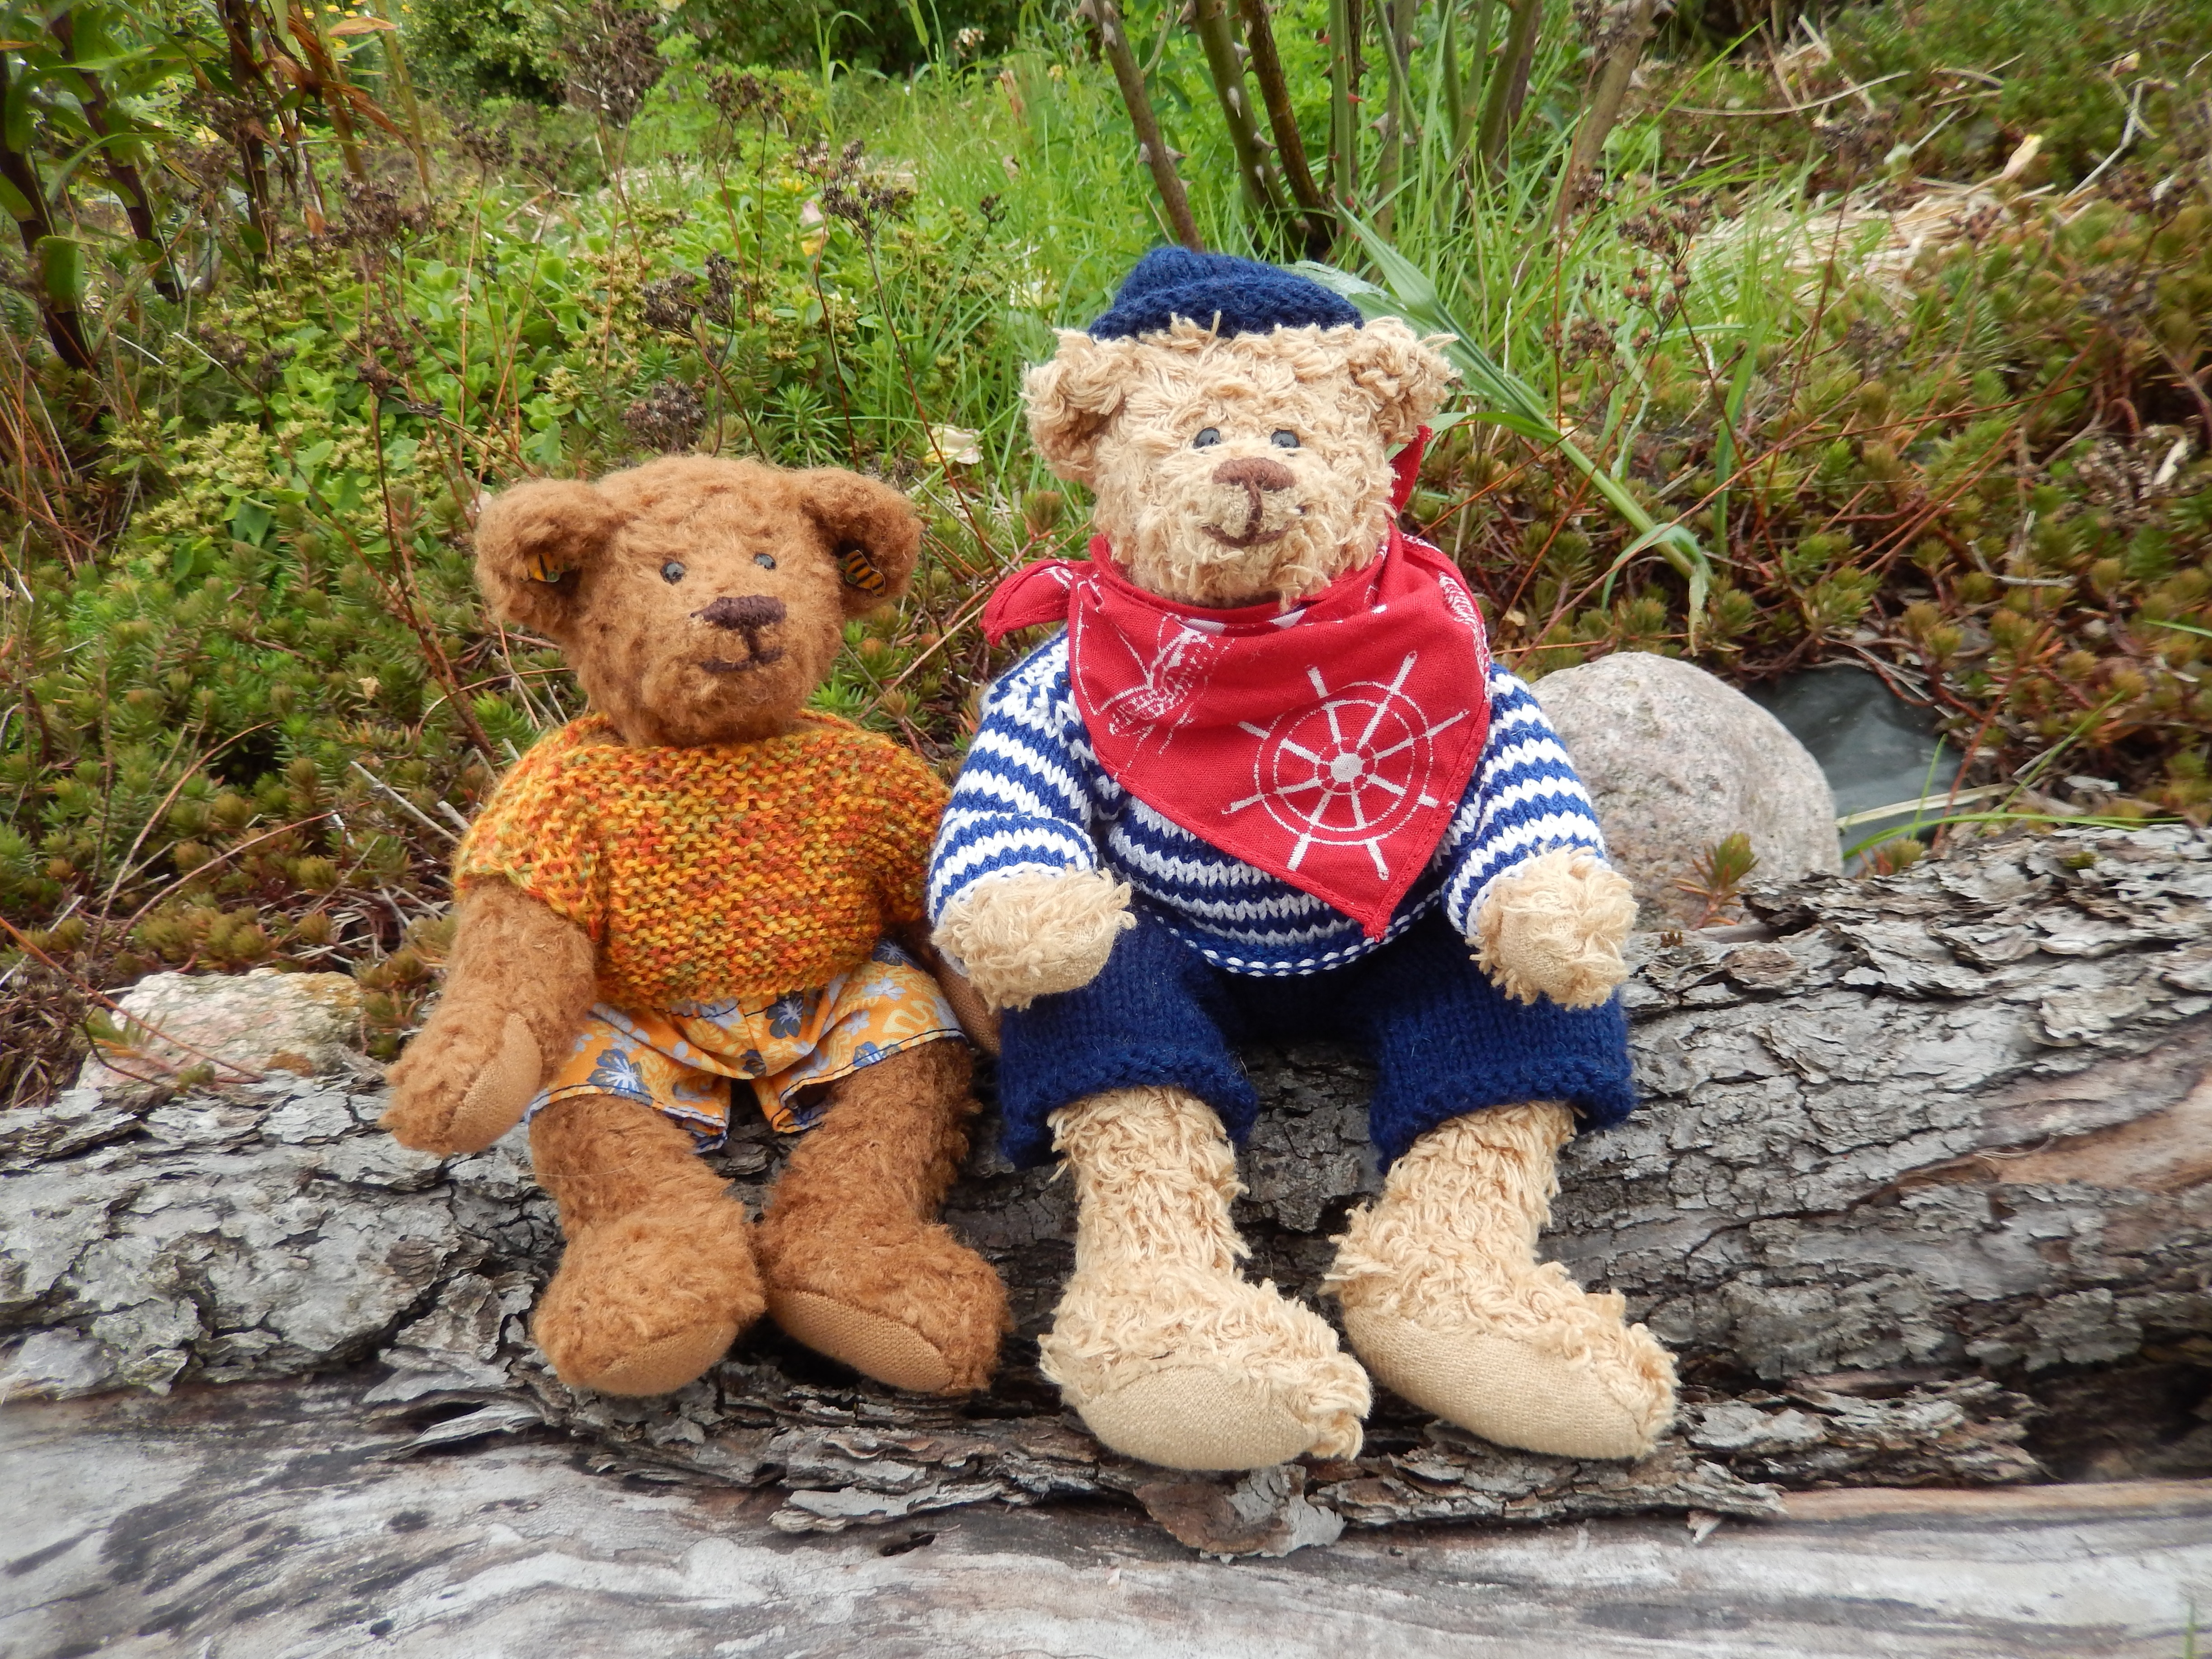 two teddy bears on log during daytime